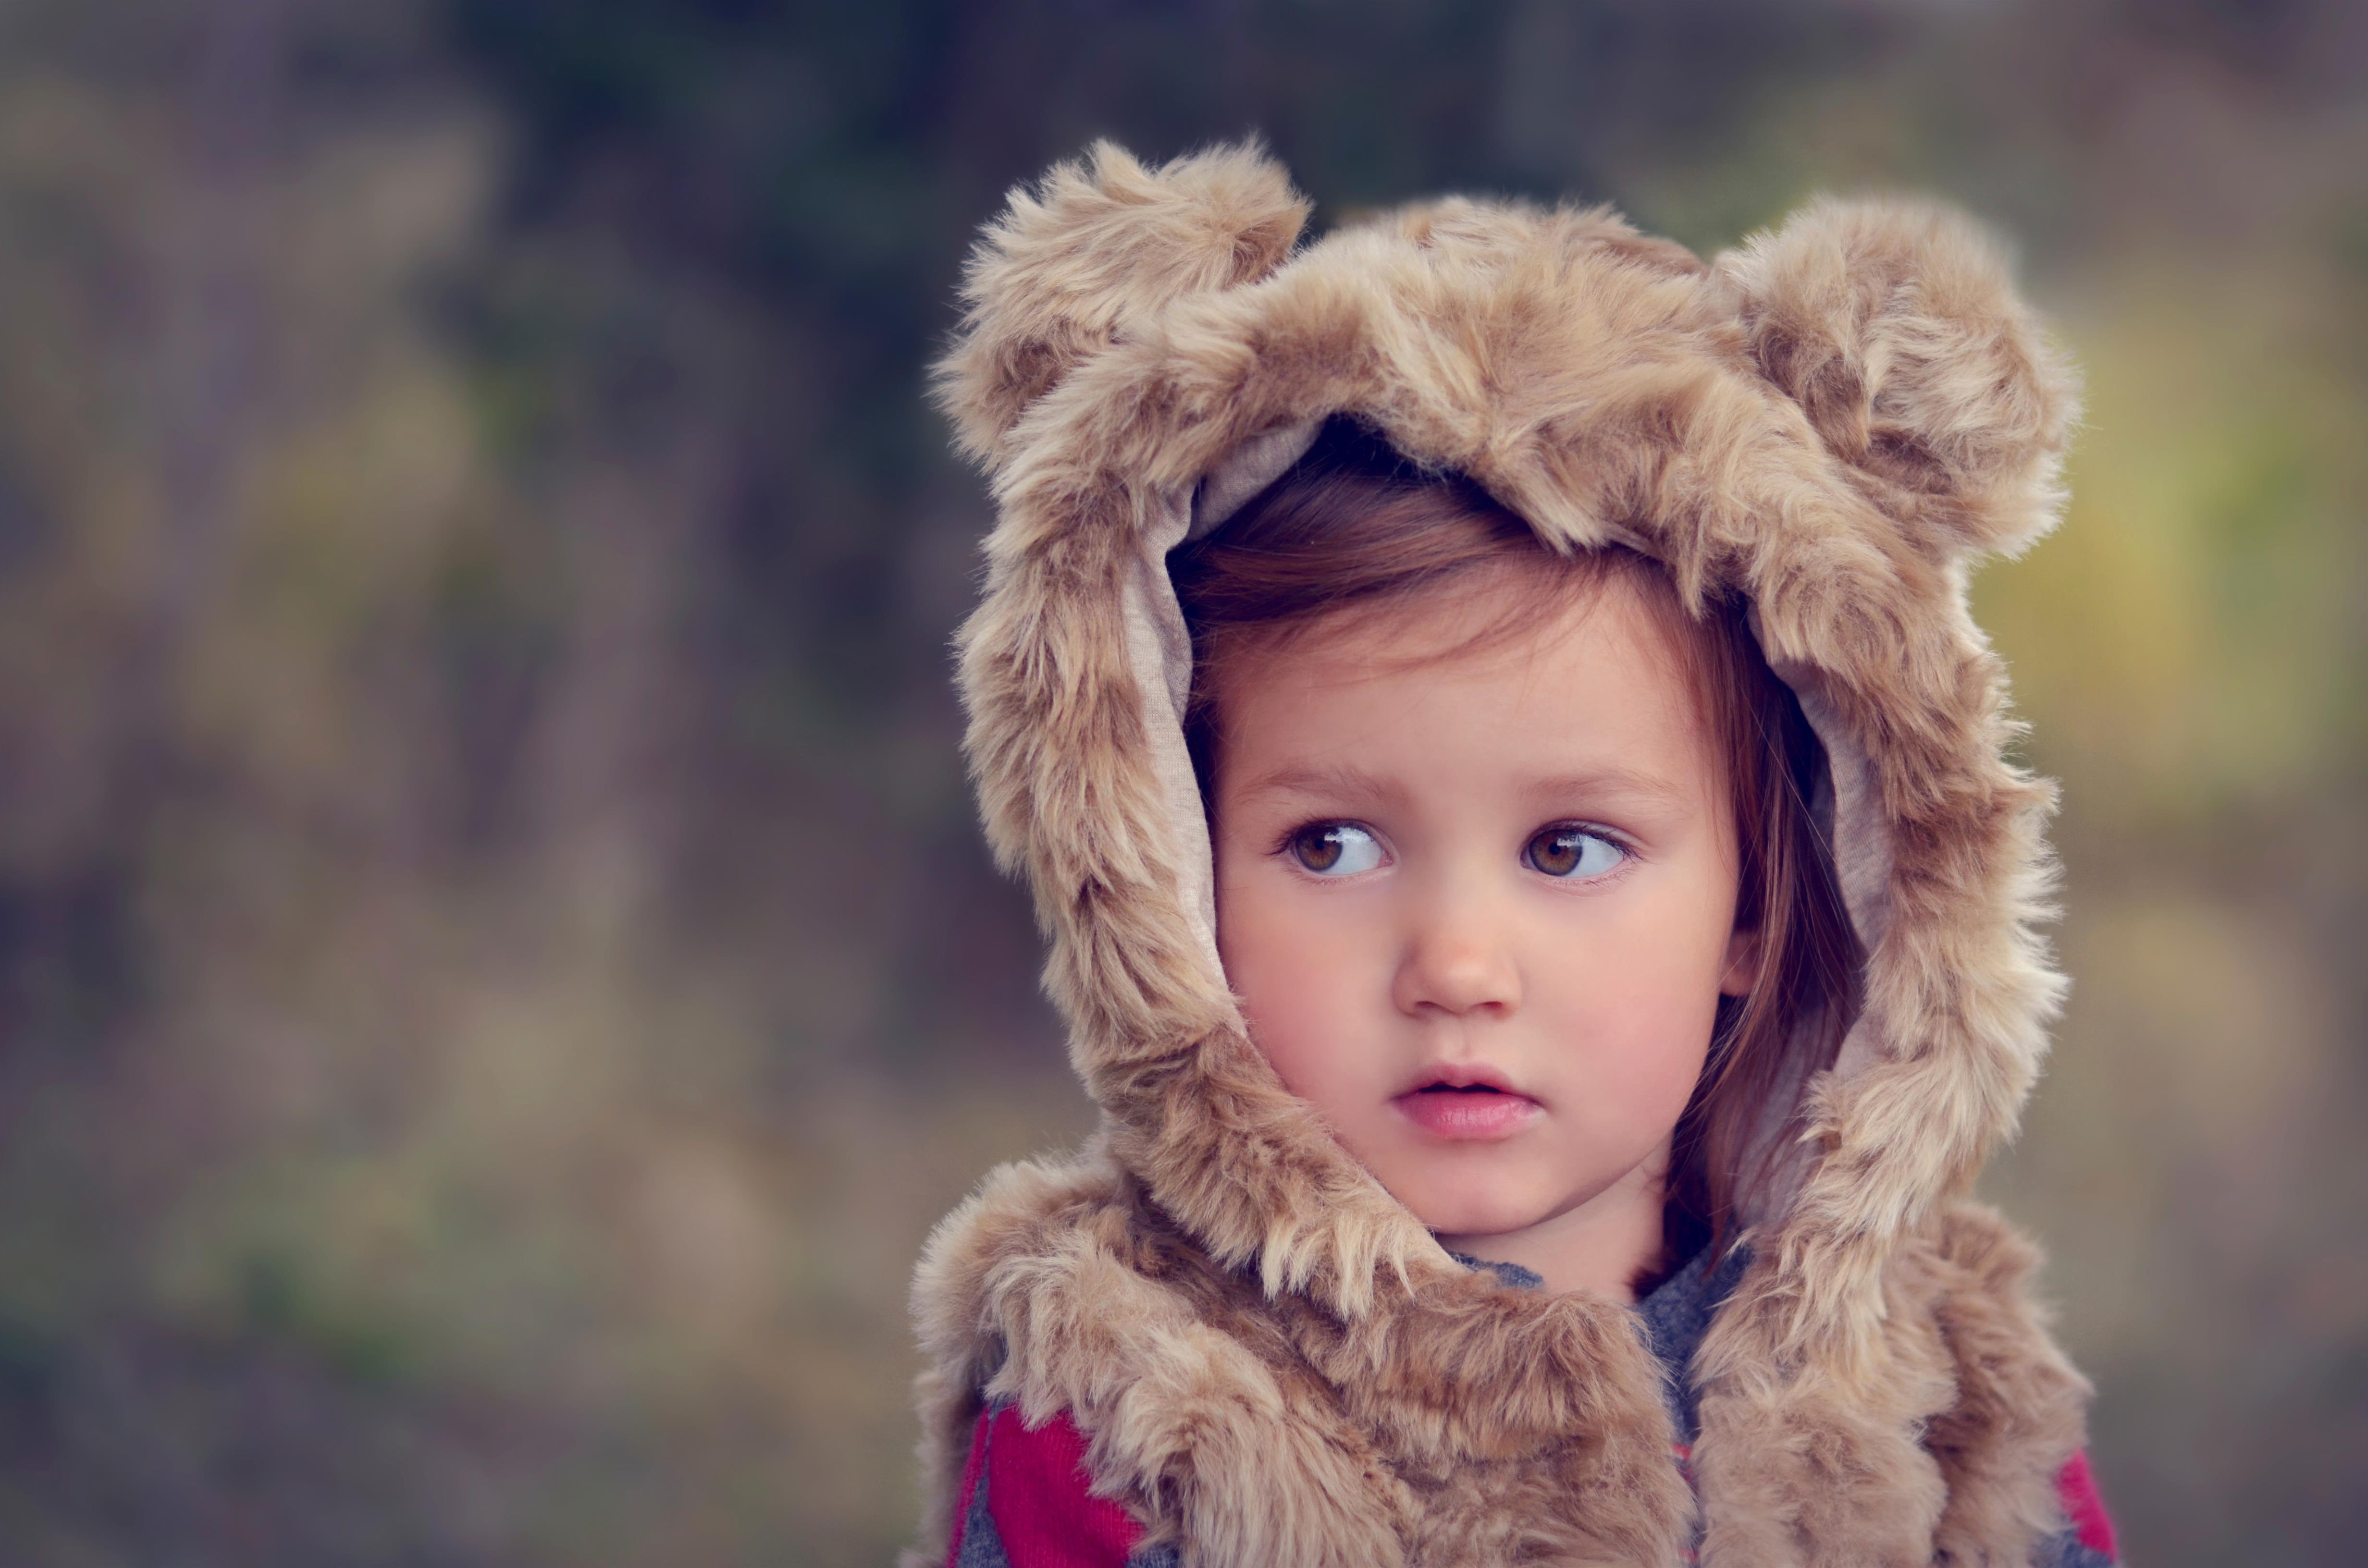 Image: The girl, looking to the side, suit, vest, fur, bear ears